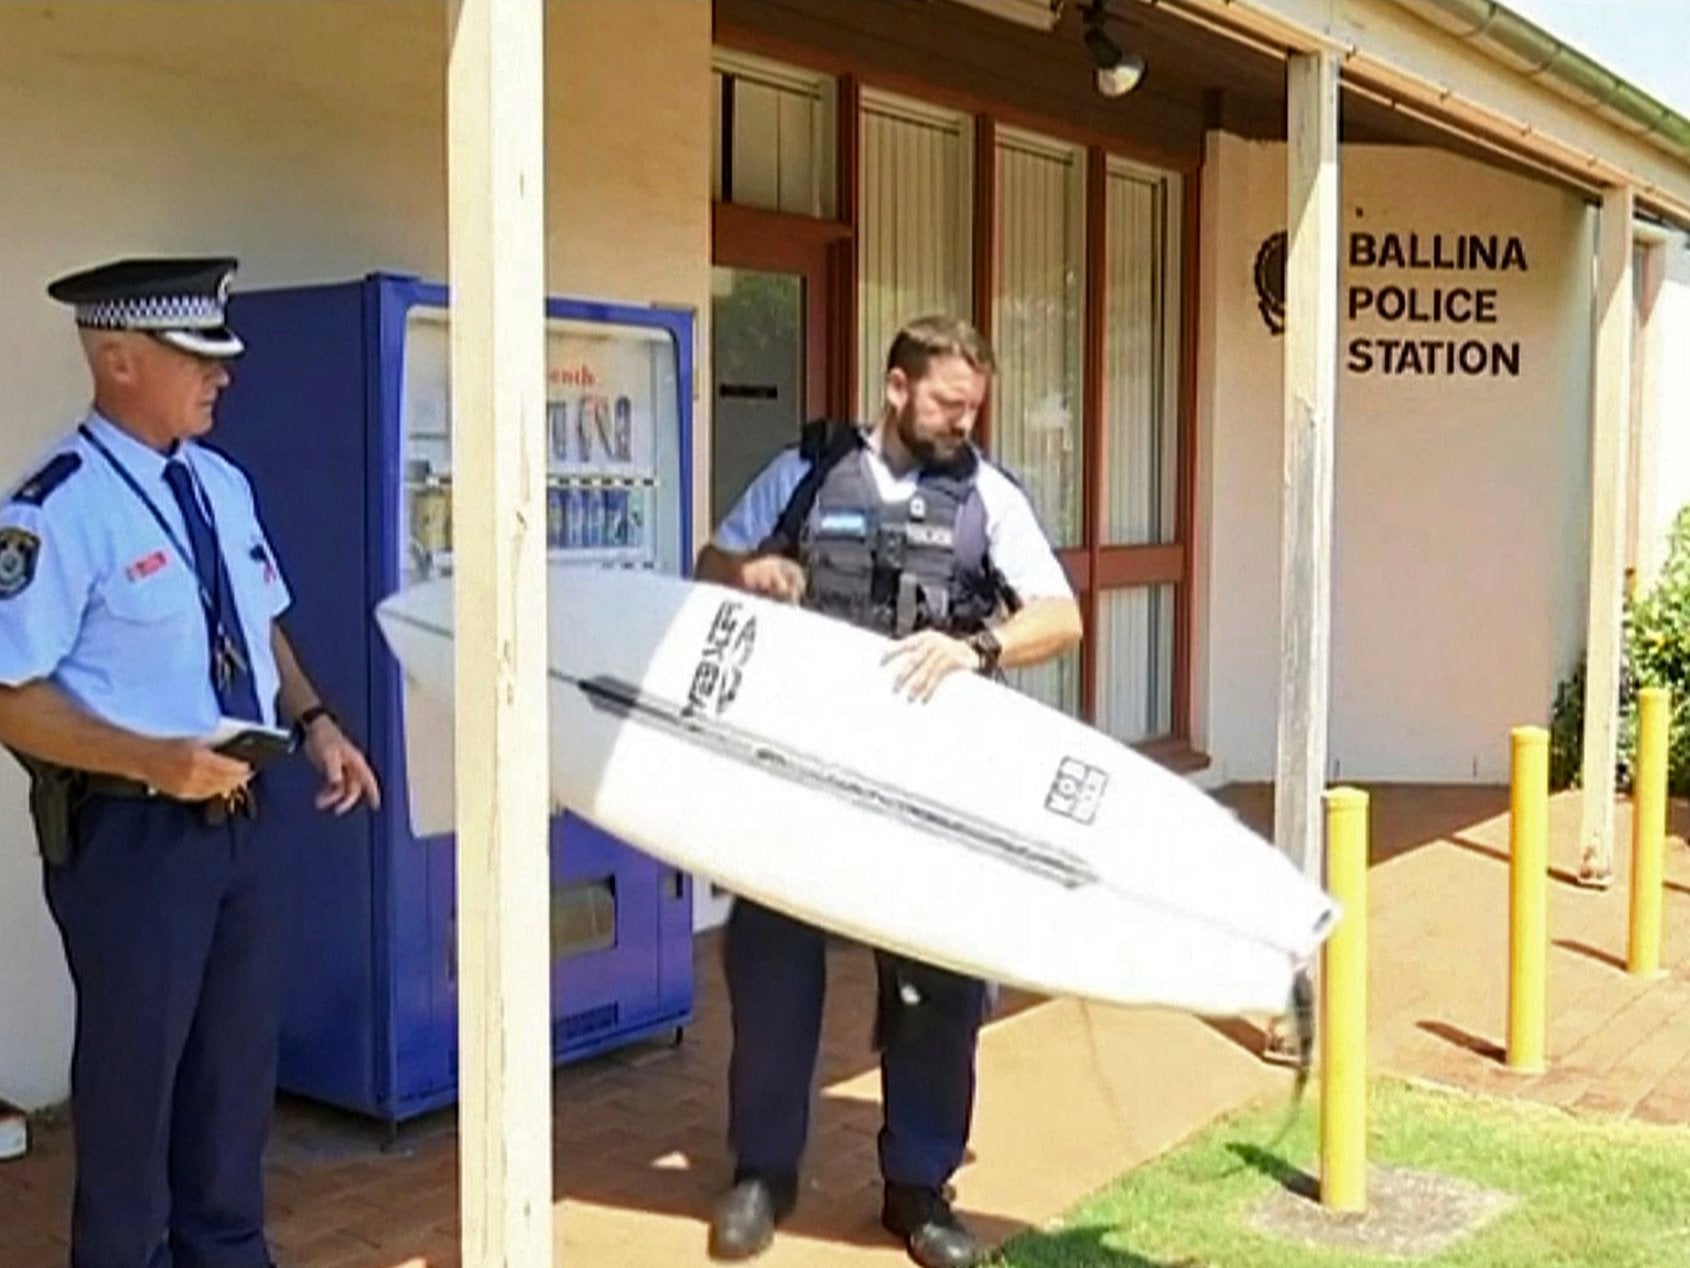 Police officer holds a victim's surfboard at a police station in Ballina, Australia